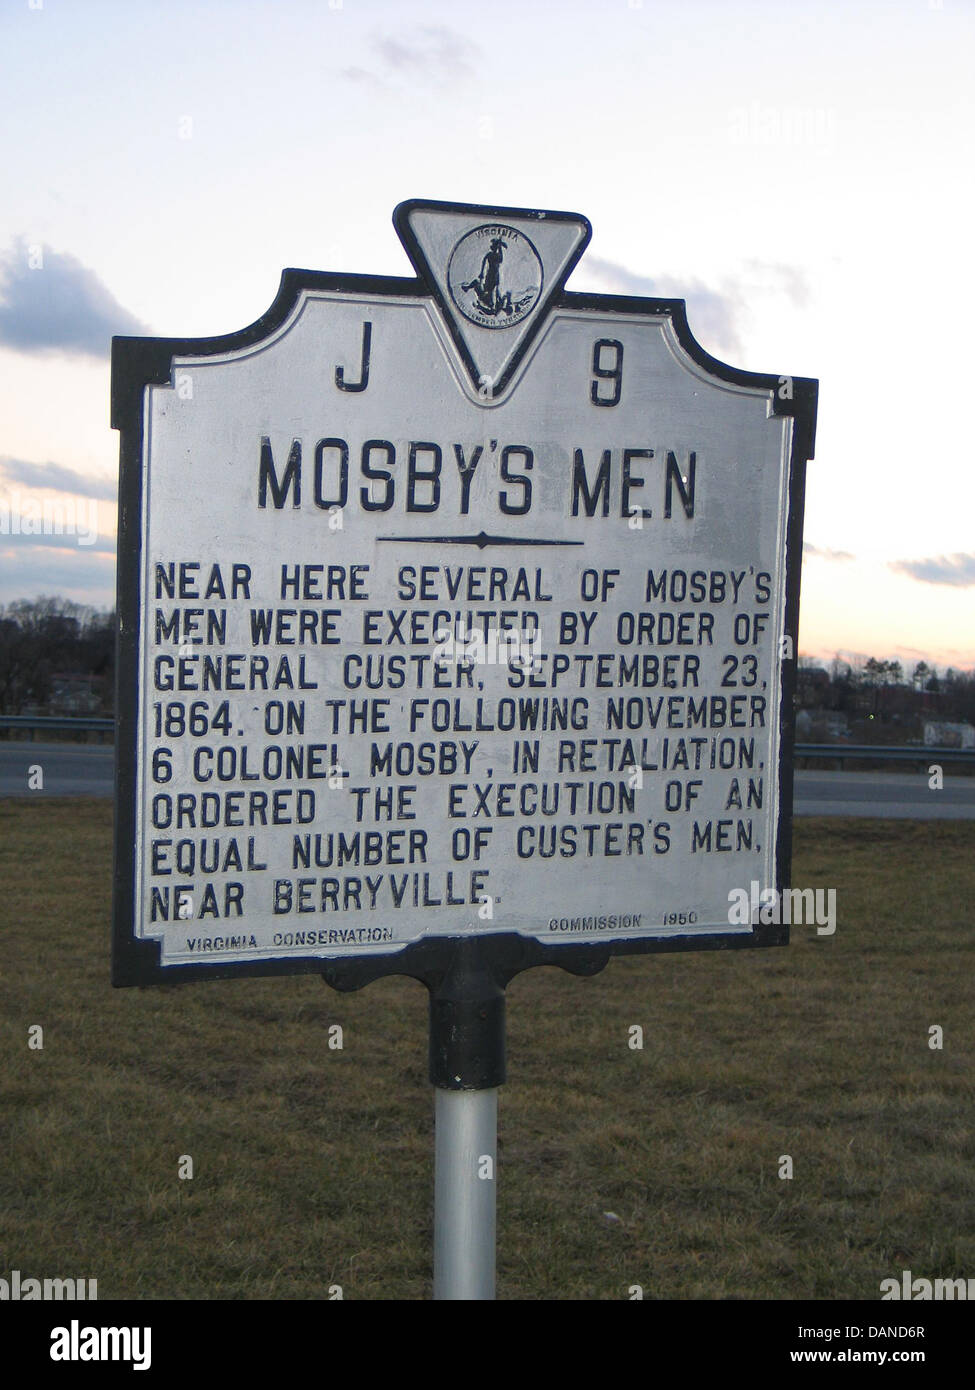 MOSBY'S MEN Near here several of Mosby's men were executed by order of General Custer, September 23, 1864. On the following November 6 Colonel Mosby, in retaliation, ordered the execution of an equal number of Custer's Men, near Berryville. Virginia Conservation Commission, 1950 Stock Photo